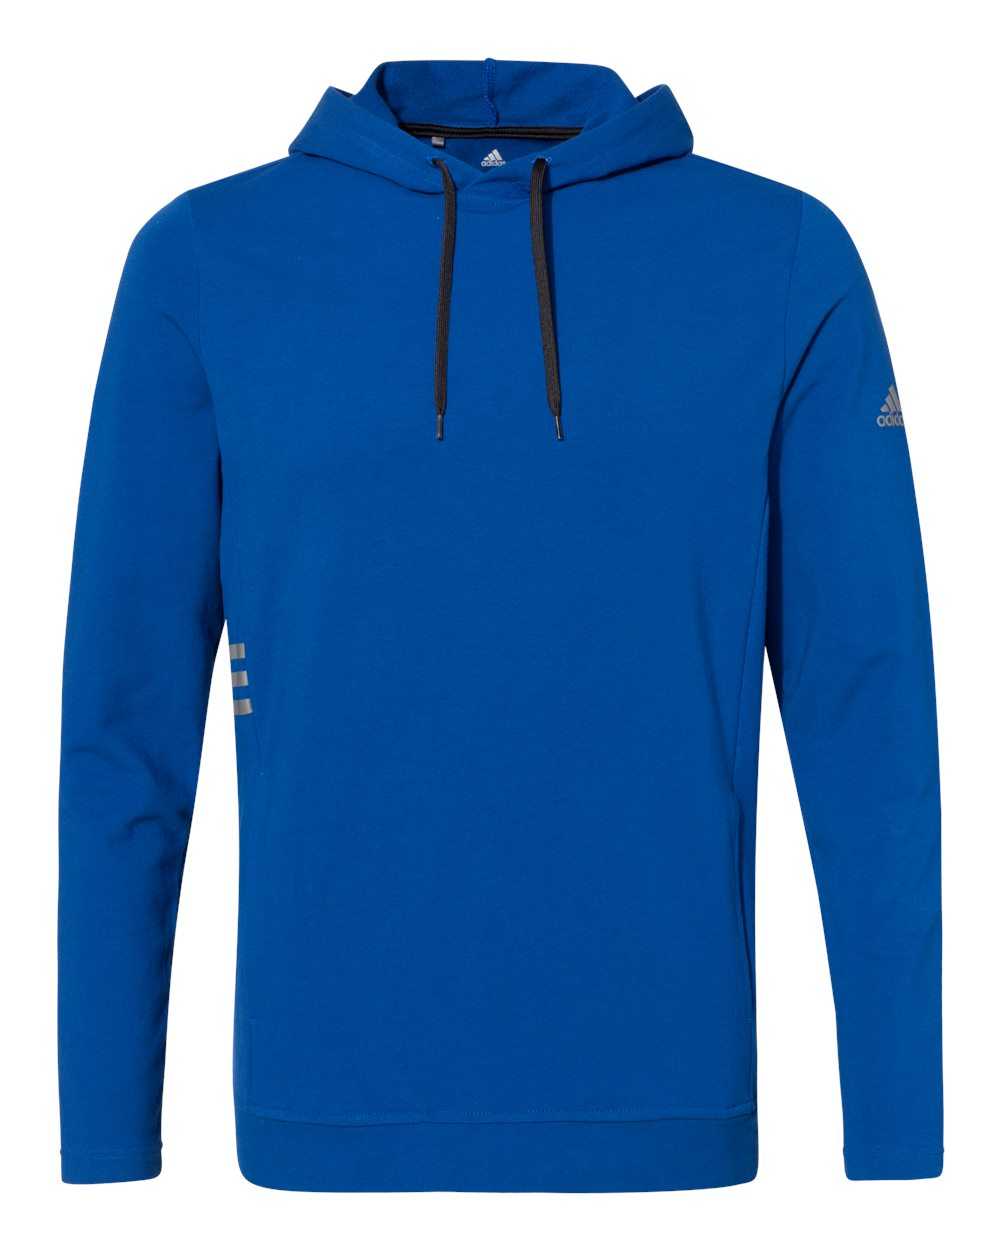 Adidas A450 Lightweight Hooded Sweatshirt - Collegiate Royal - HIT a Double